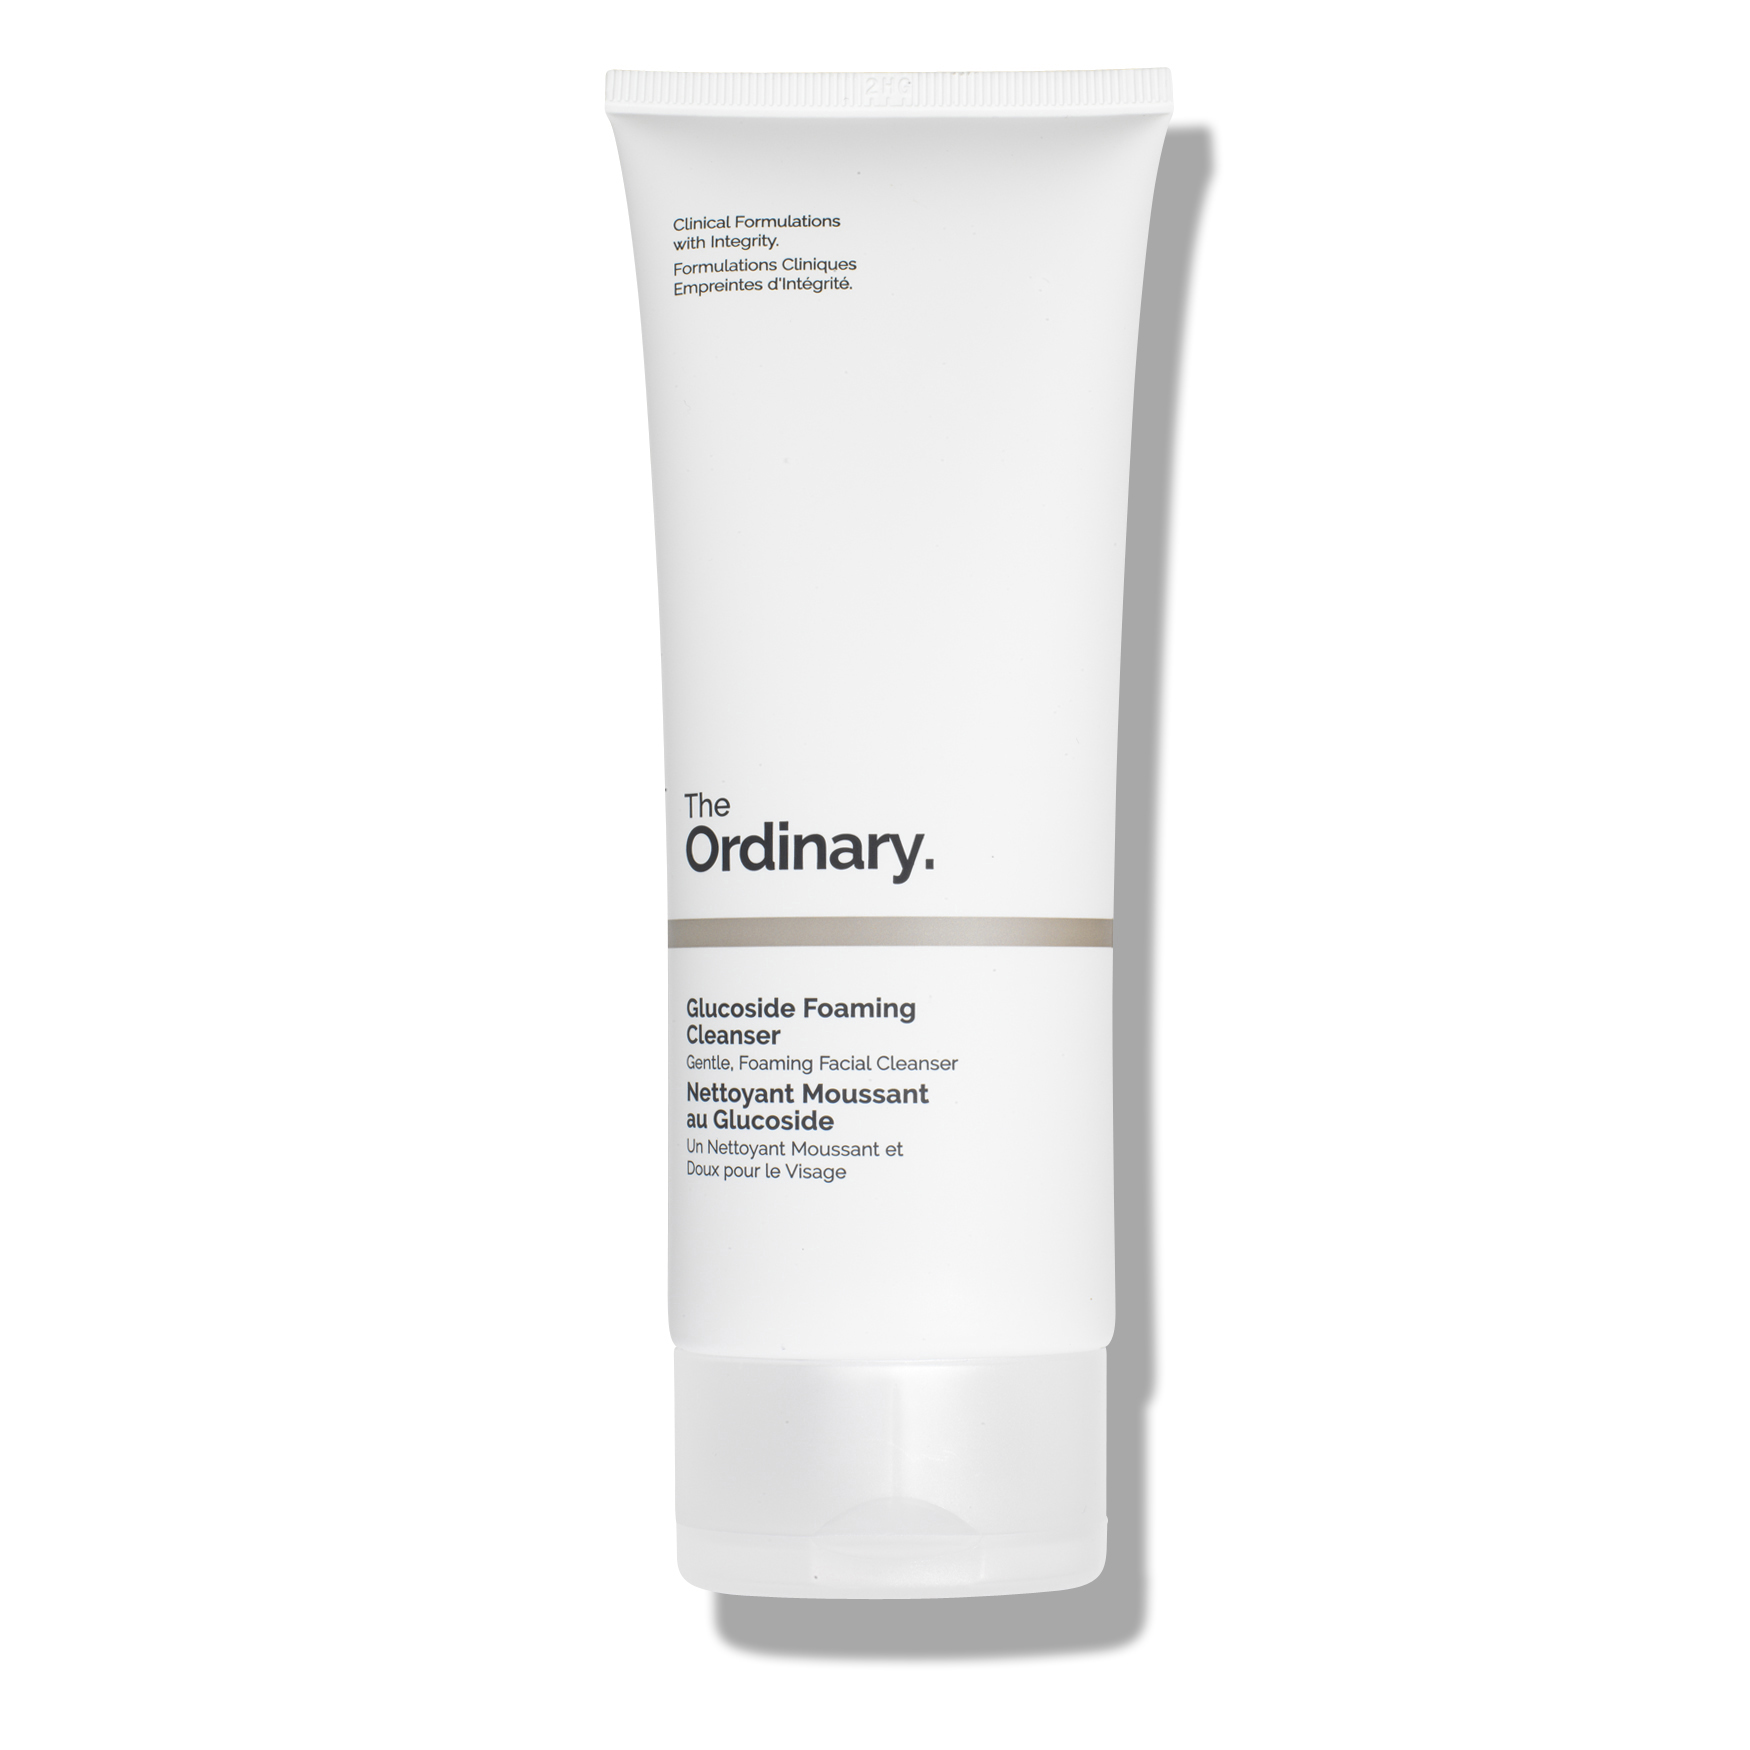 The Ordinary Glucoside nettoyant moussant | Space NK